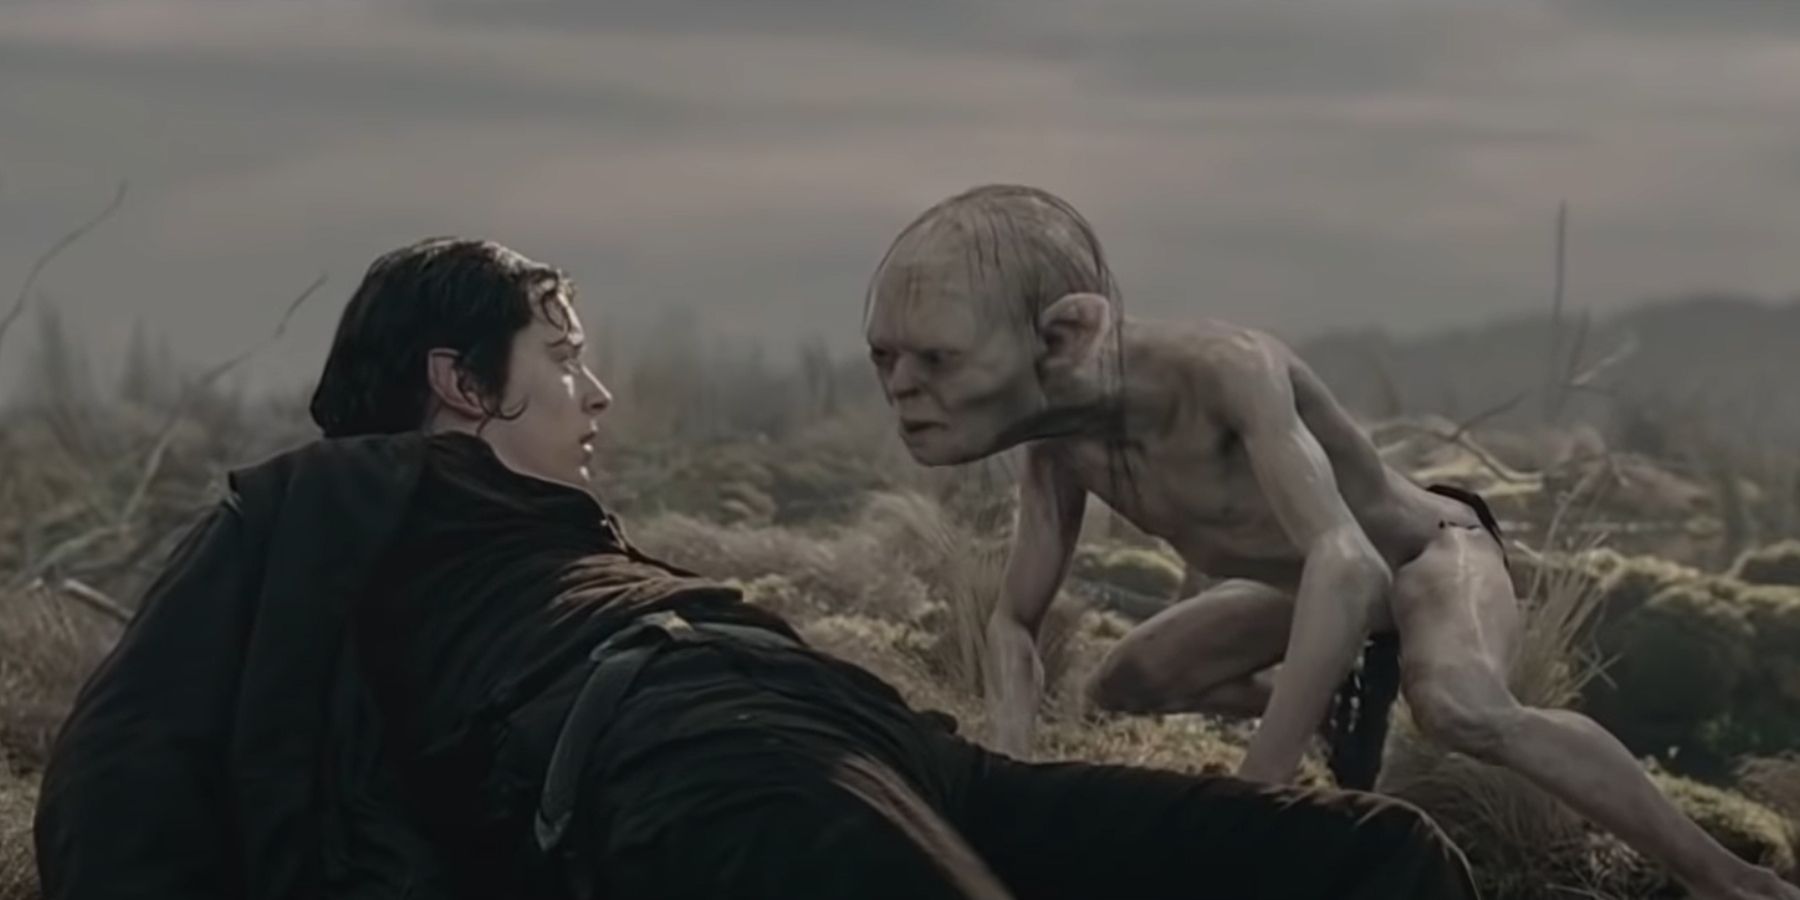 Gollum saves frodo on the marshes